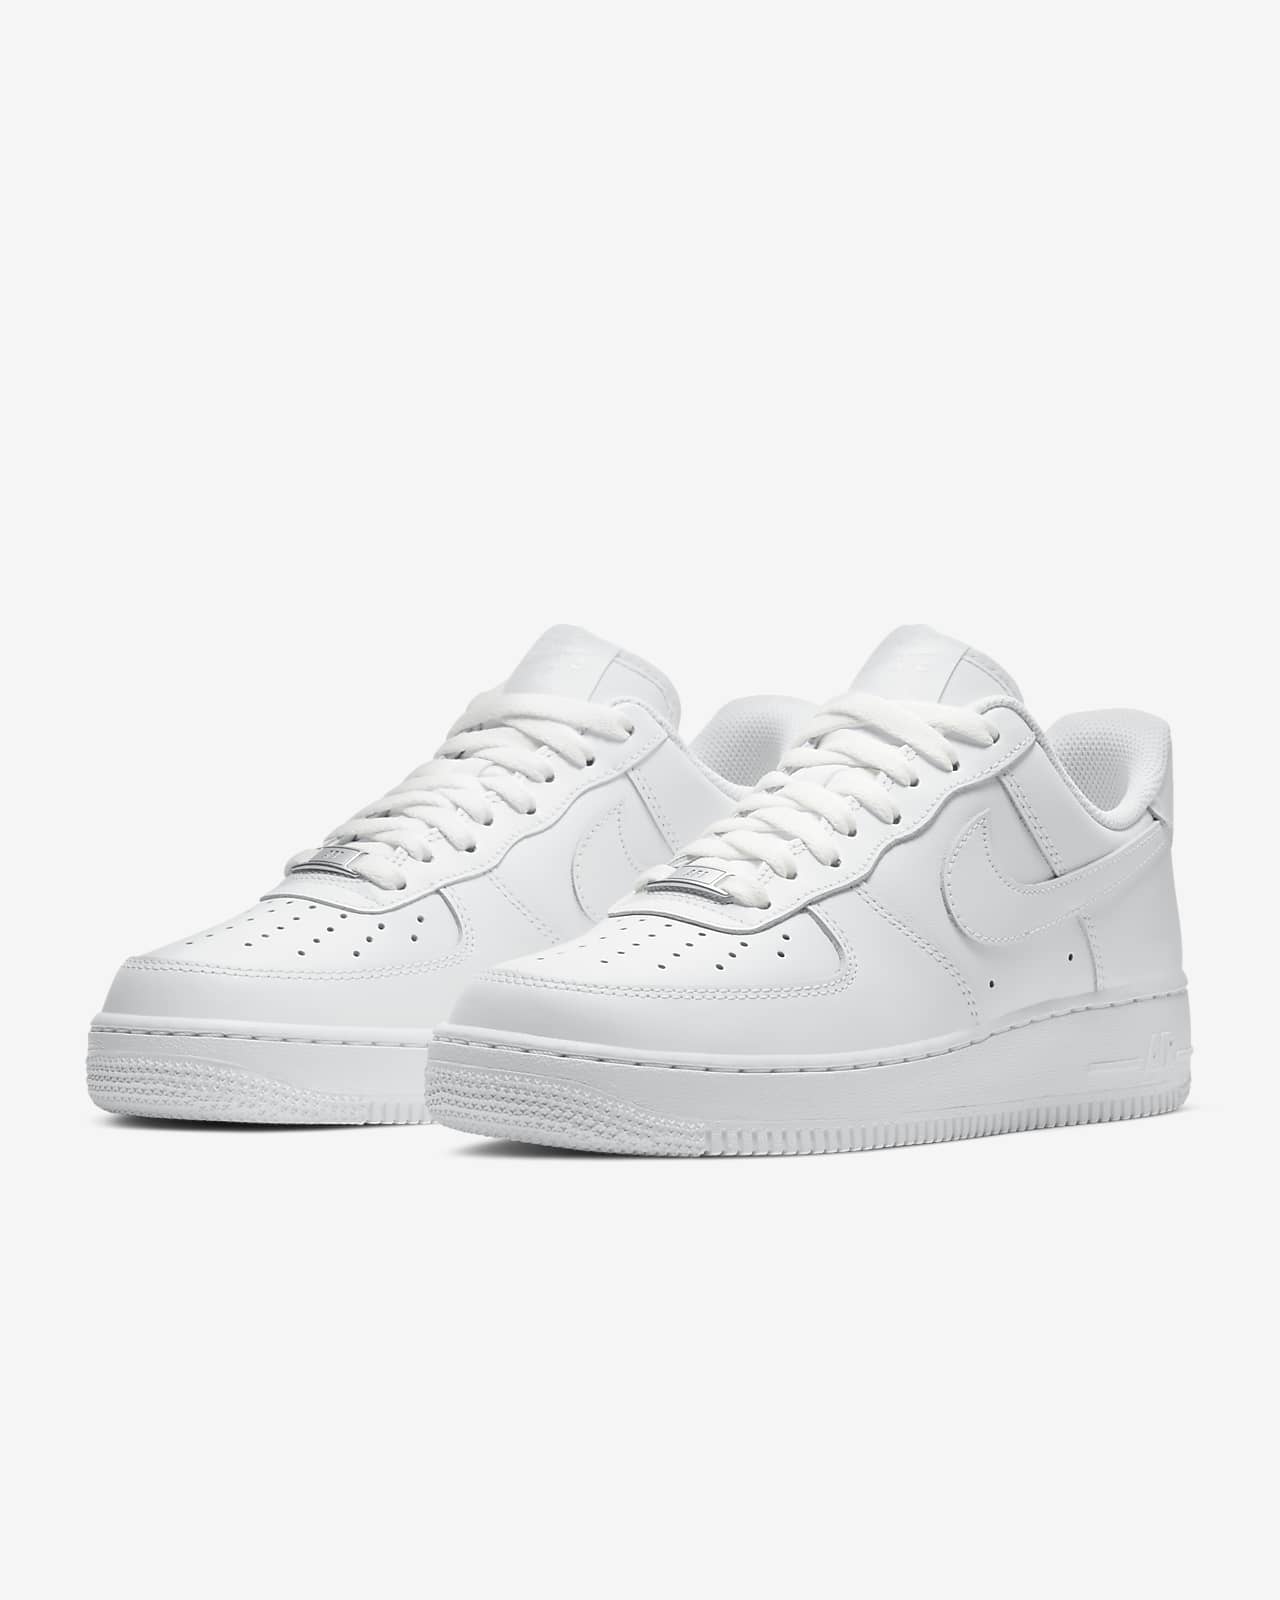 air force ones womens 7.5